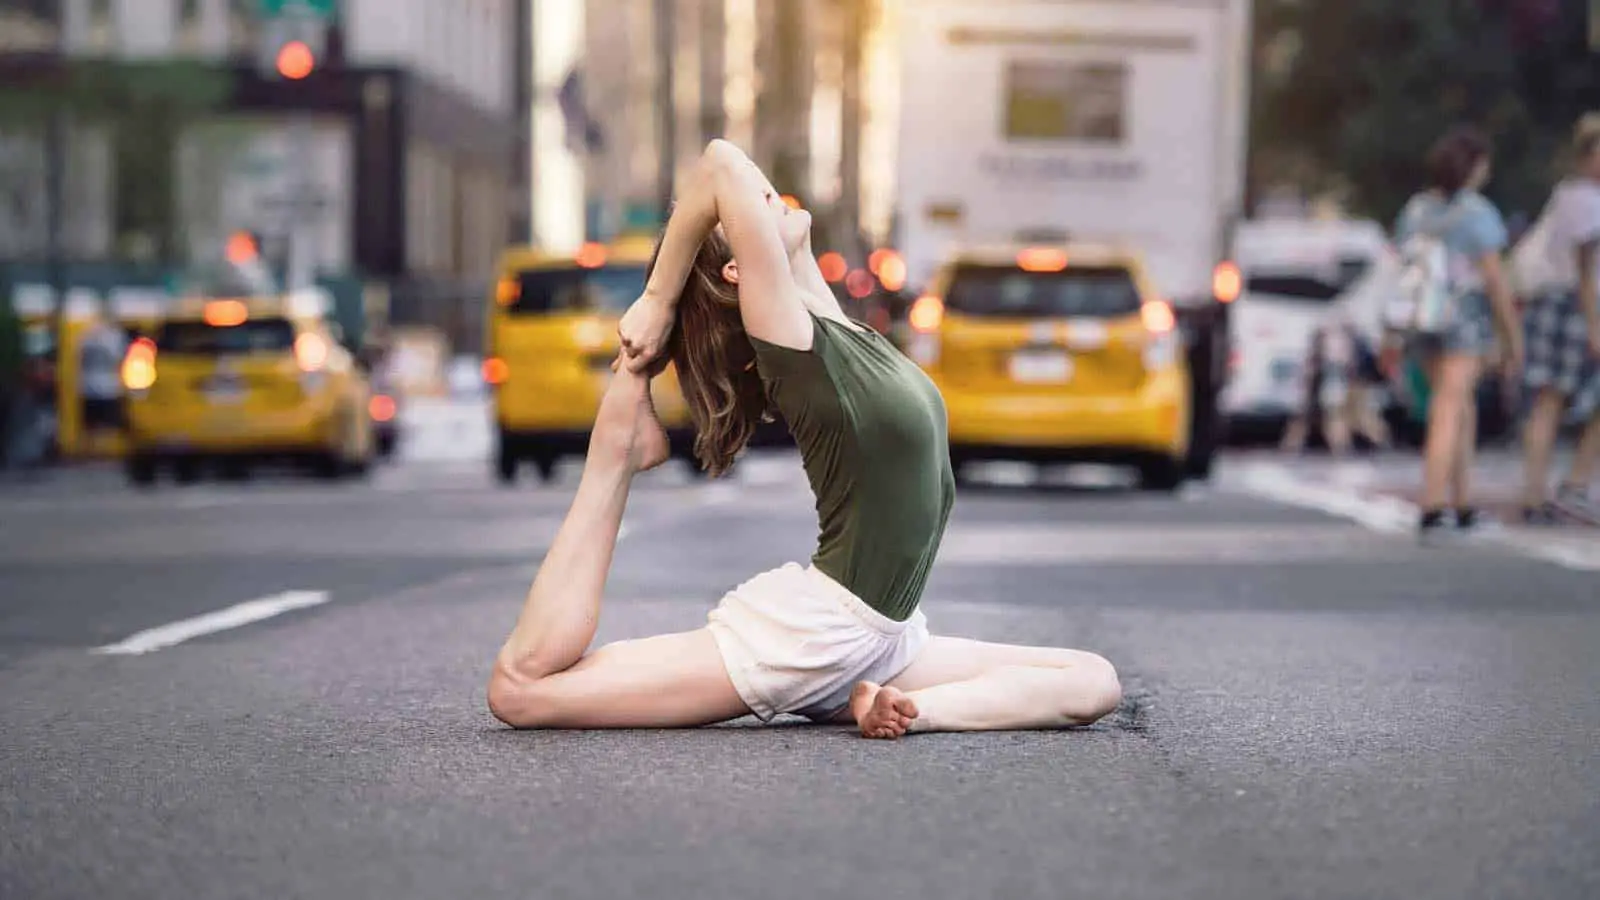 Why yoga is important in modern life